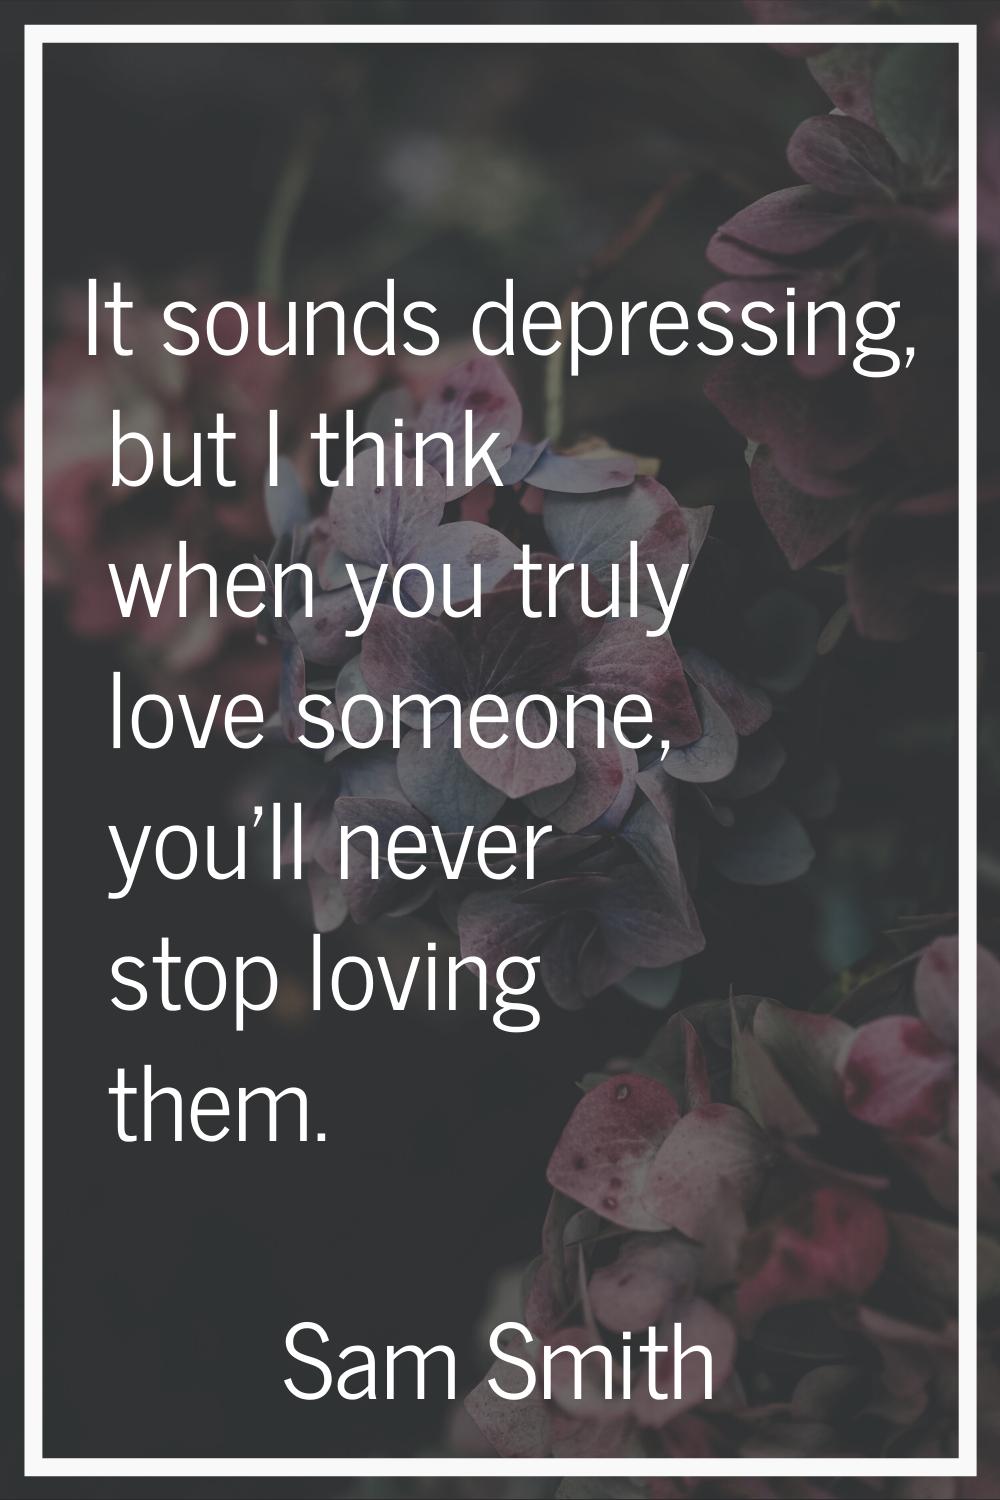 It sounds depressing, but I think when you truly love someone, you'll never stop loving them.